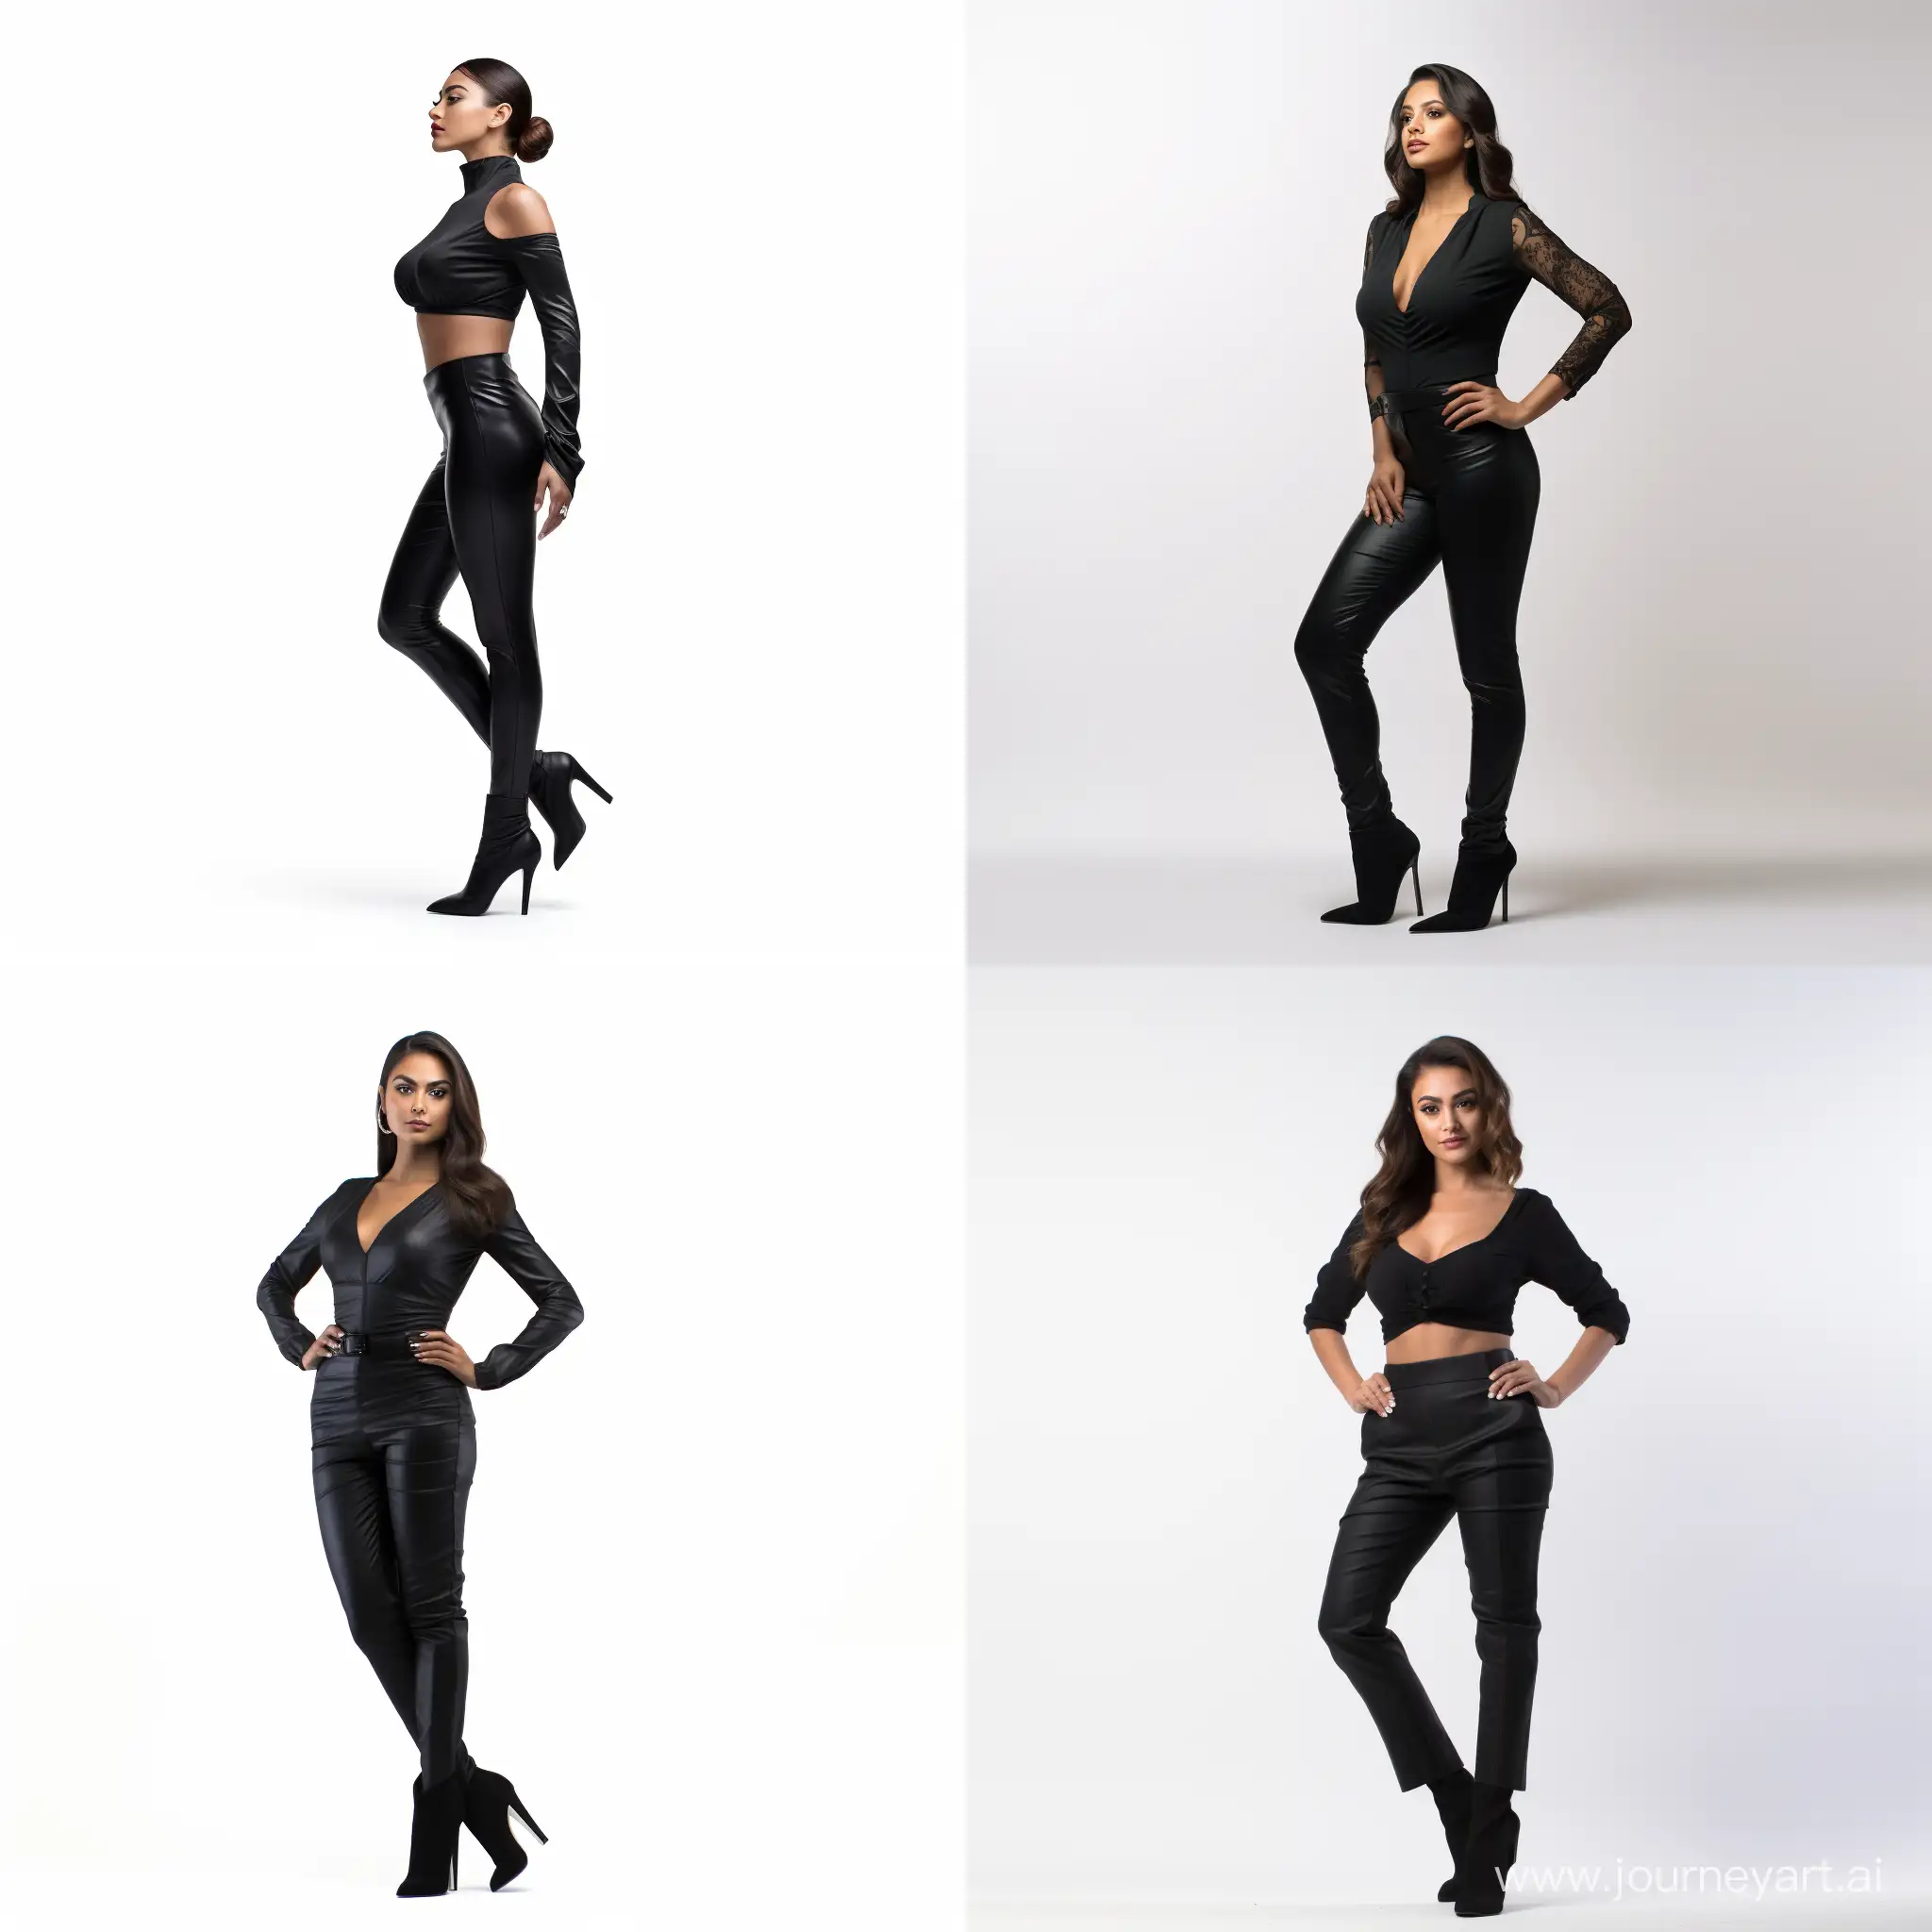 Elegant-Confident-Woman-in-Fitted-Black-Attire-on-White-Background